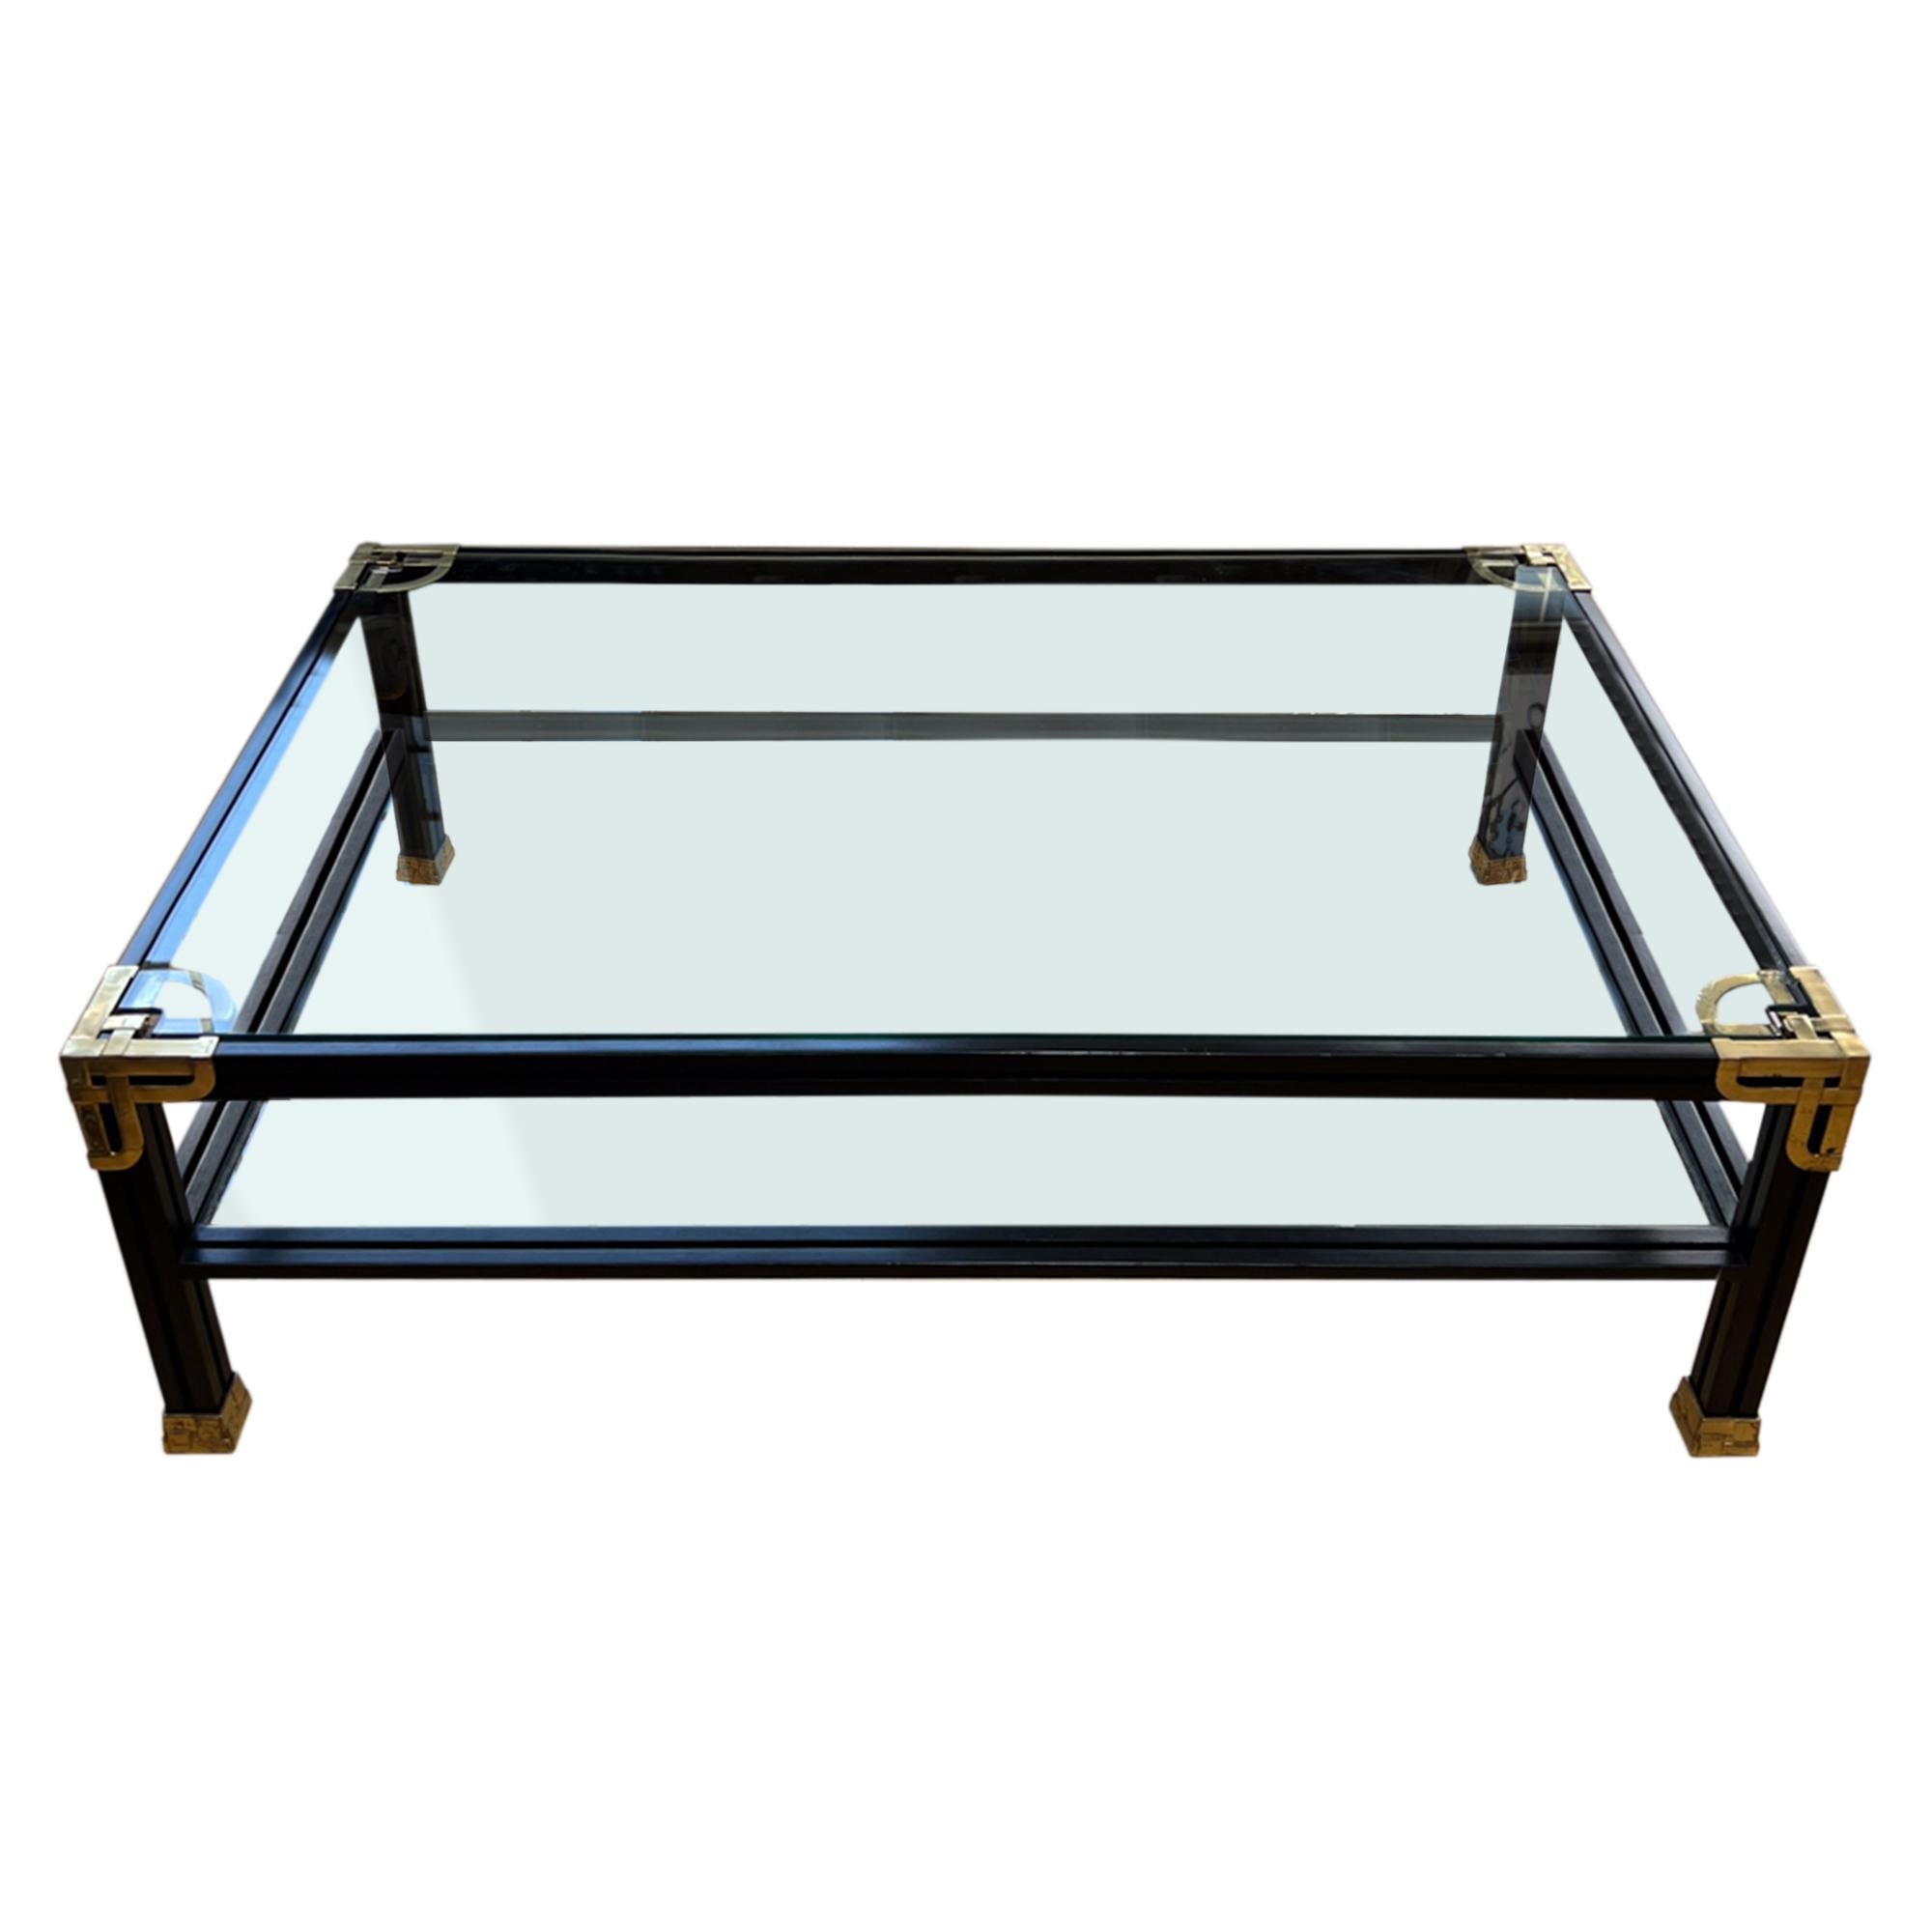 This grand scale two tier coffee table was made in Spain in the 1970s by the furniture designer Valenti.

The ebonised wood is decorated with brass and the shelves are clear glass. The lower shelf is 24cm high.

Valenti was originally a silversmith